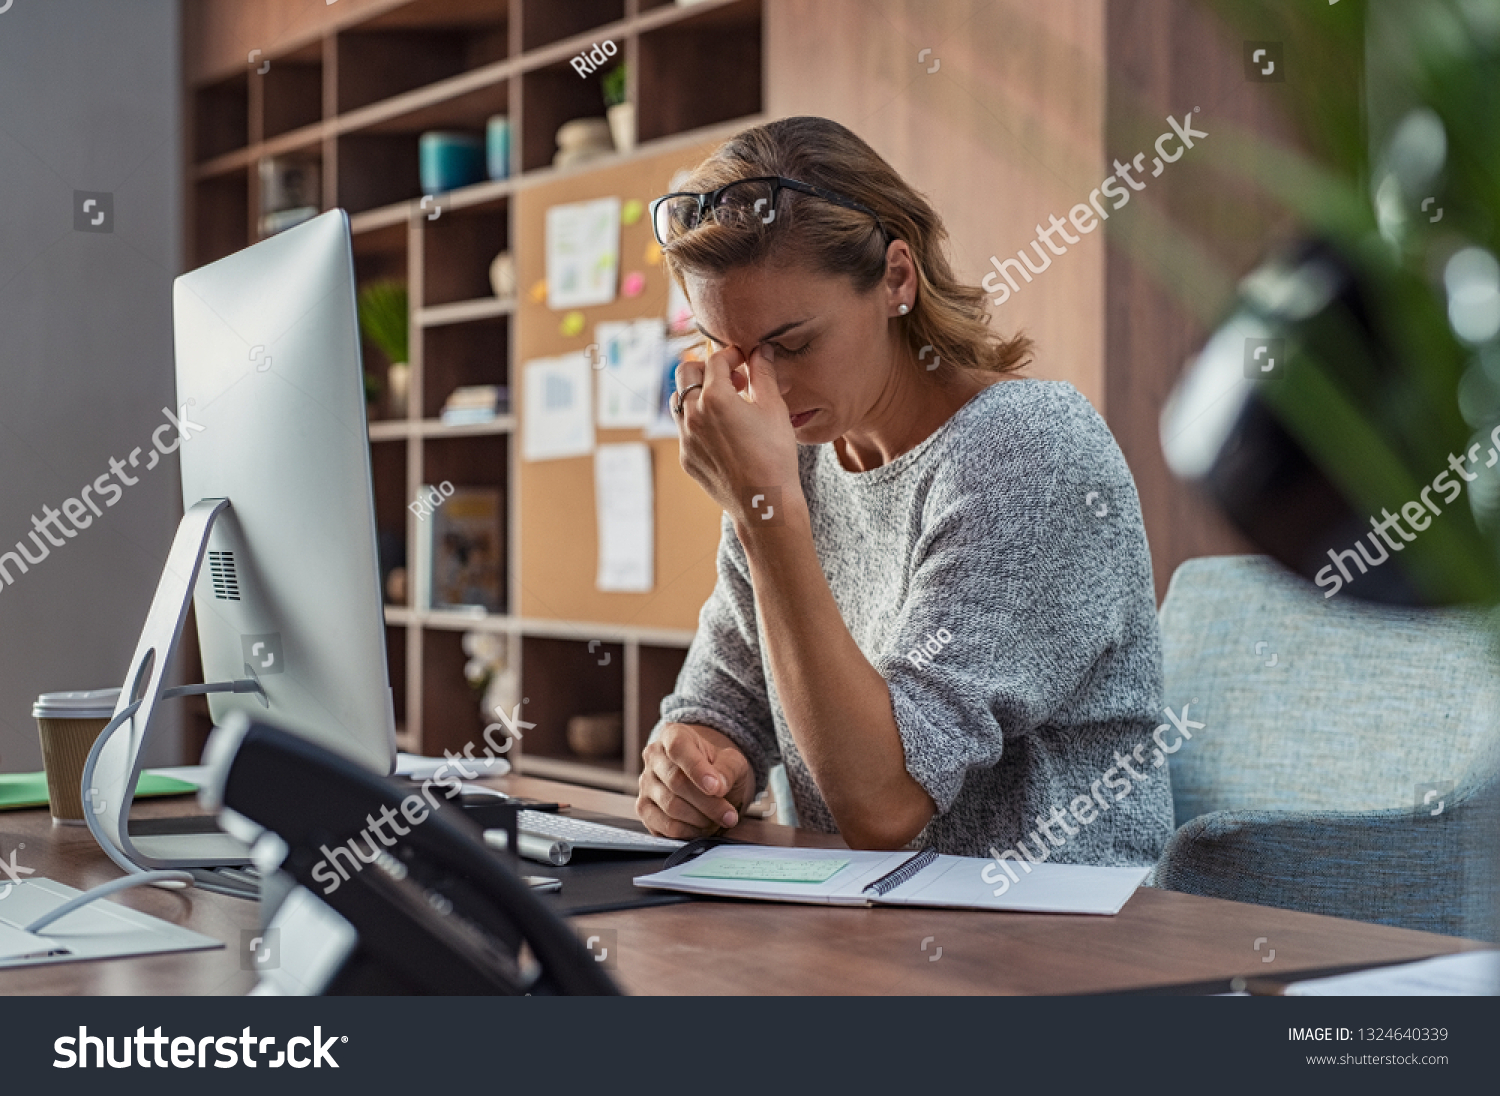 Exhausted businesswoman having a headache at office. Mature creative woman working at office desk feeling tired. Stressed casual business woman feeling eye pain while overworking on desktop computer. #1324640339